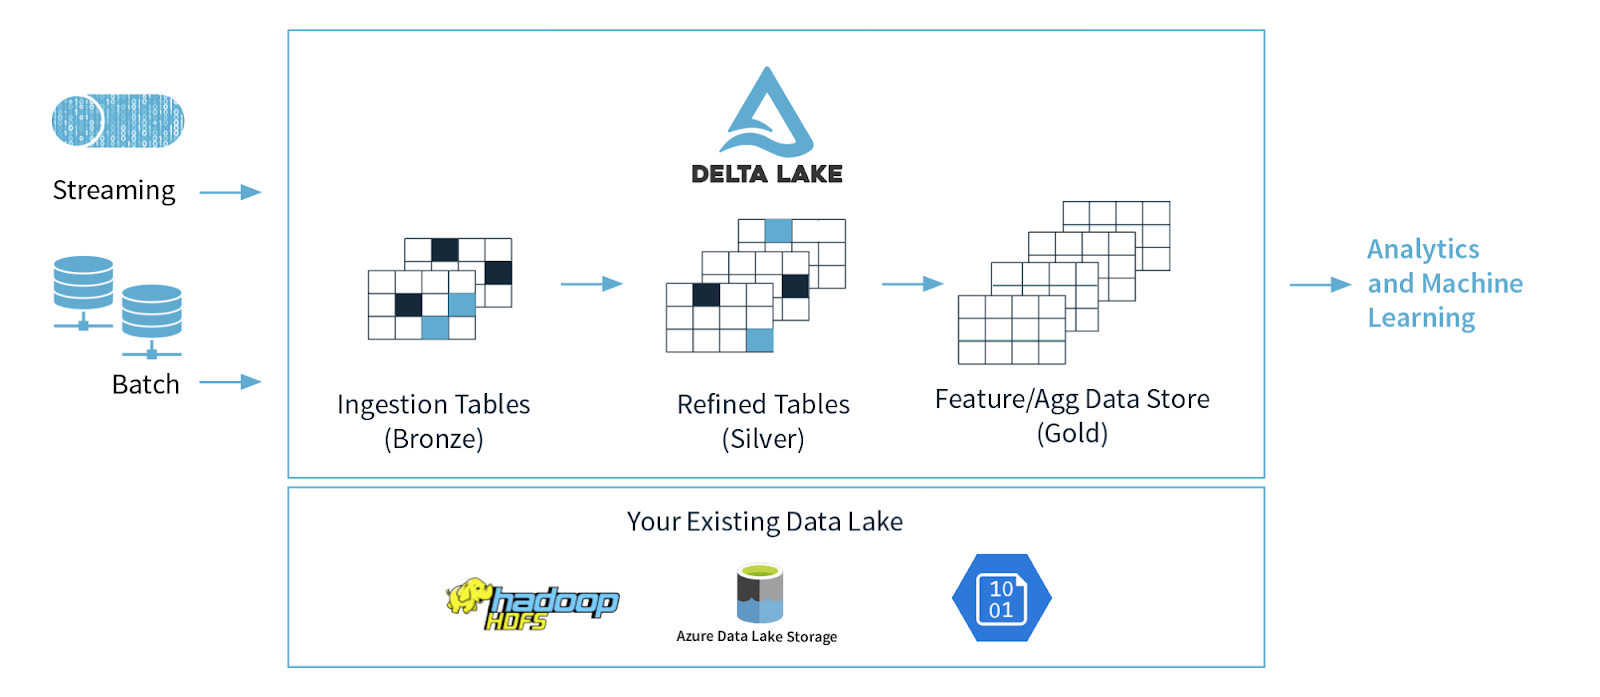 Process batch and streaming data with Delta Lake on your existing Azure data lake, including Azure Data Lake Storage, Hadoop File System (HDFS) and Azure Blob Storage